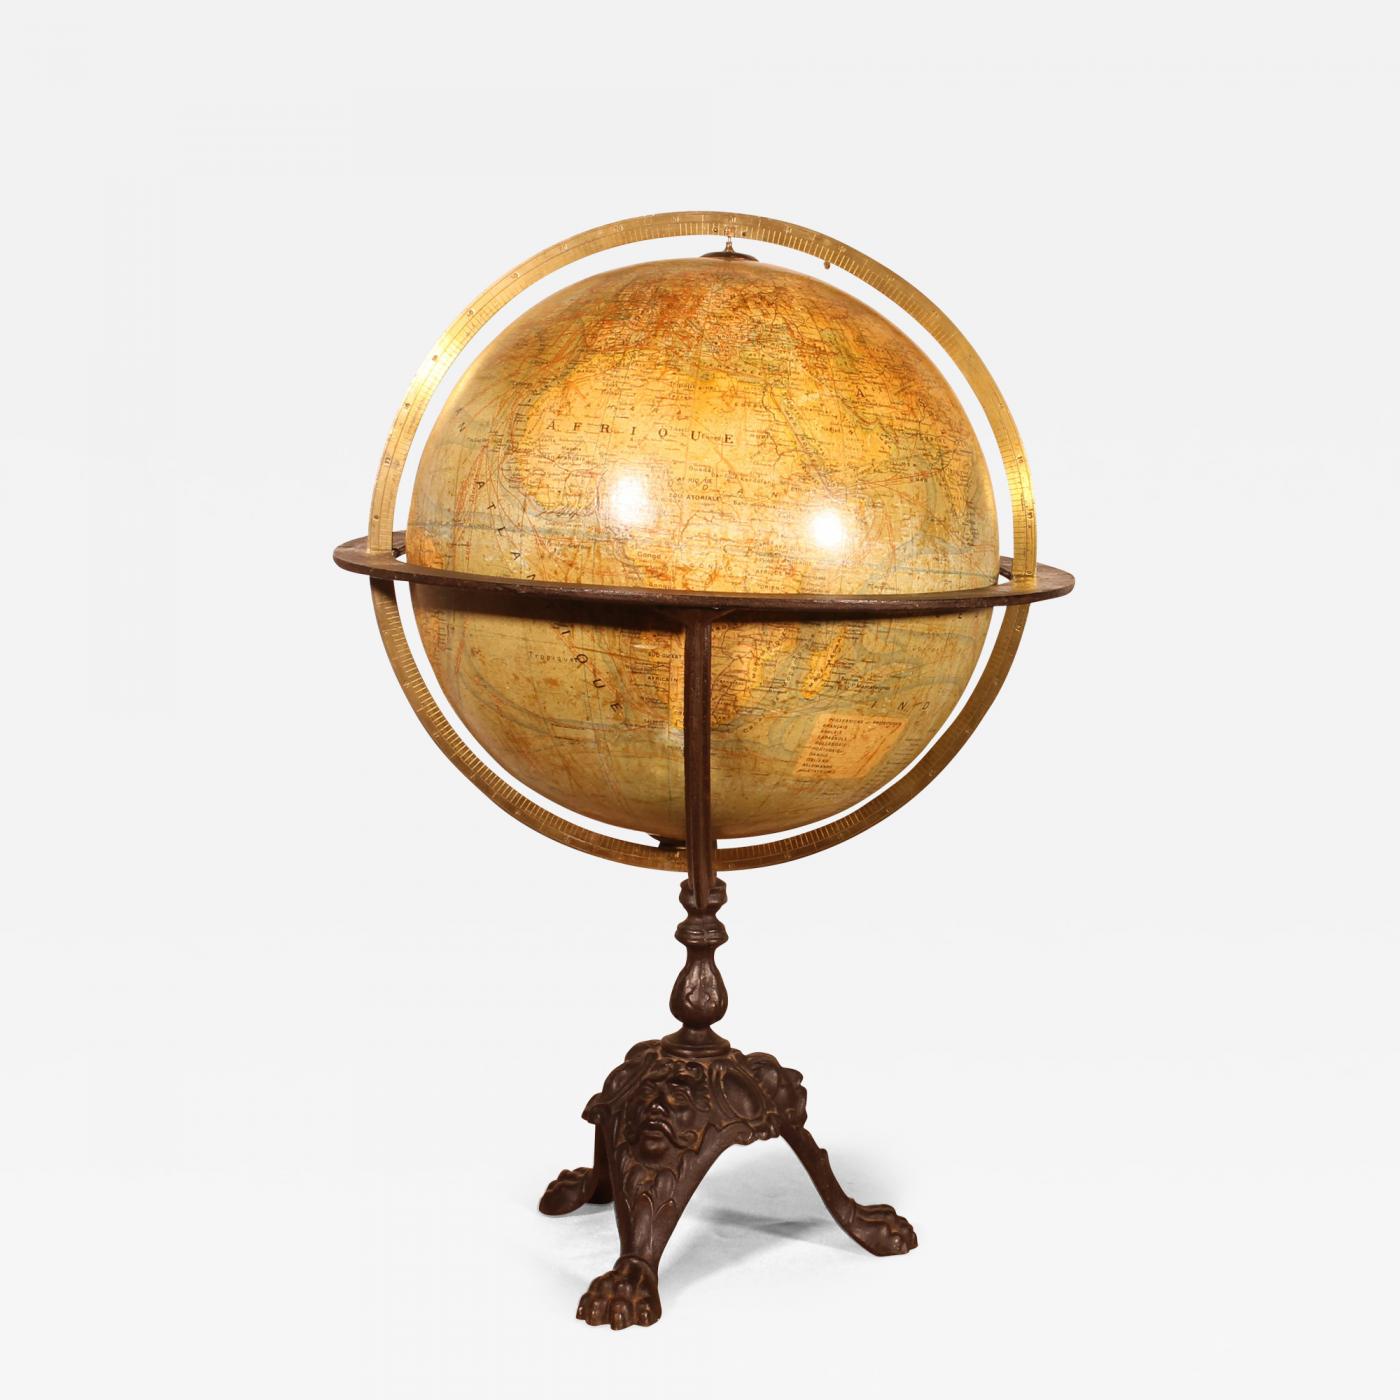 19th Century French Table Globe / Globe Terrestre by J. Forest / Paris